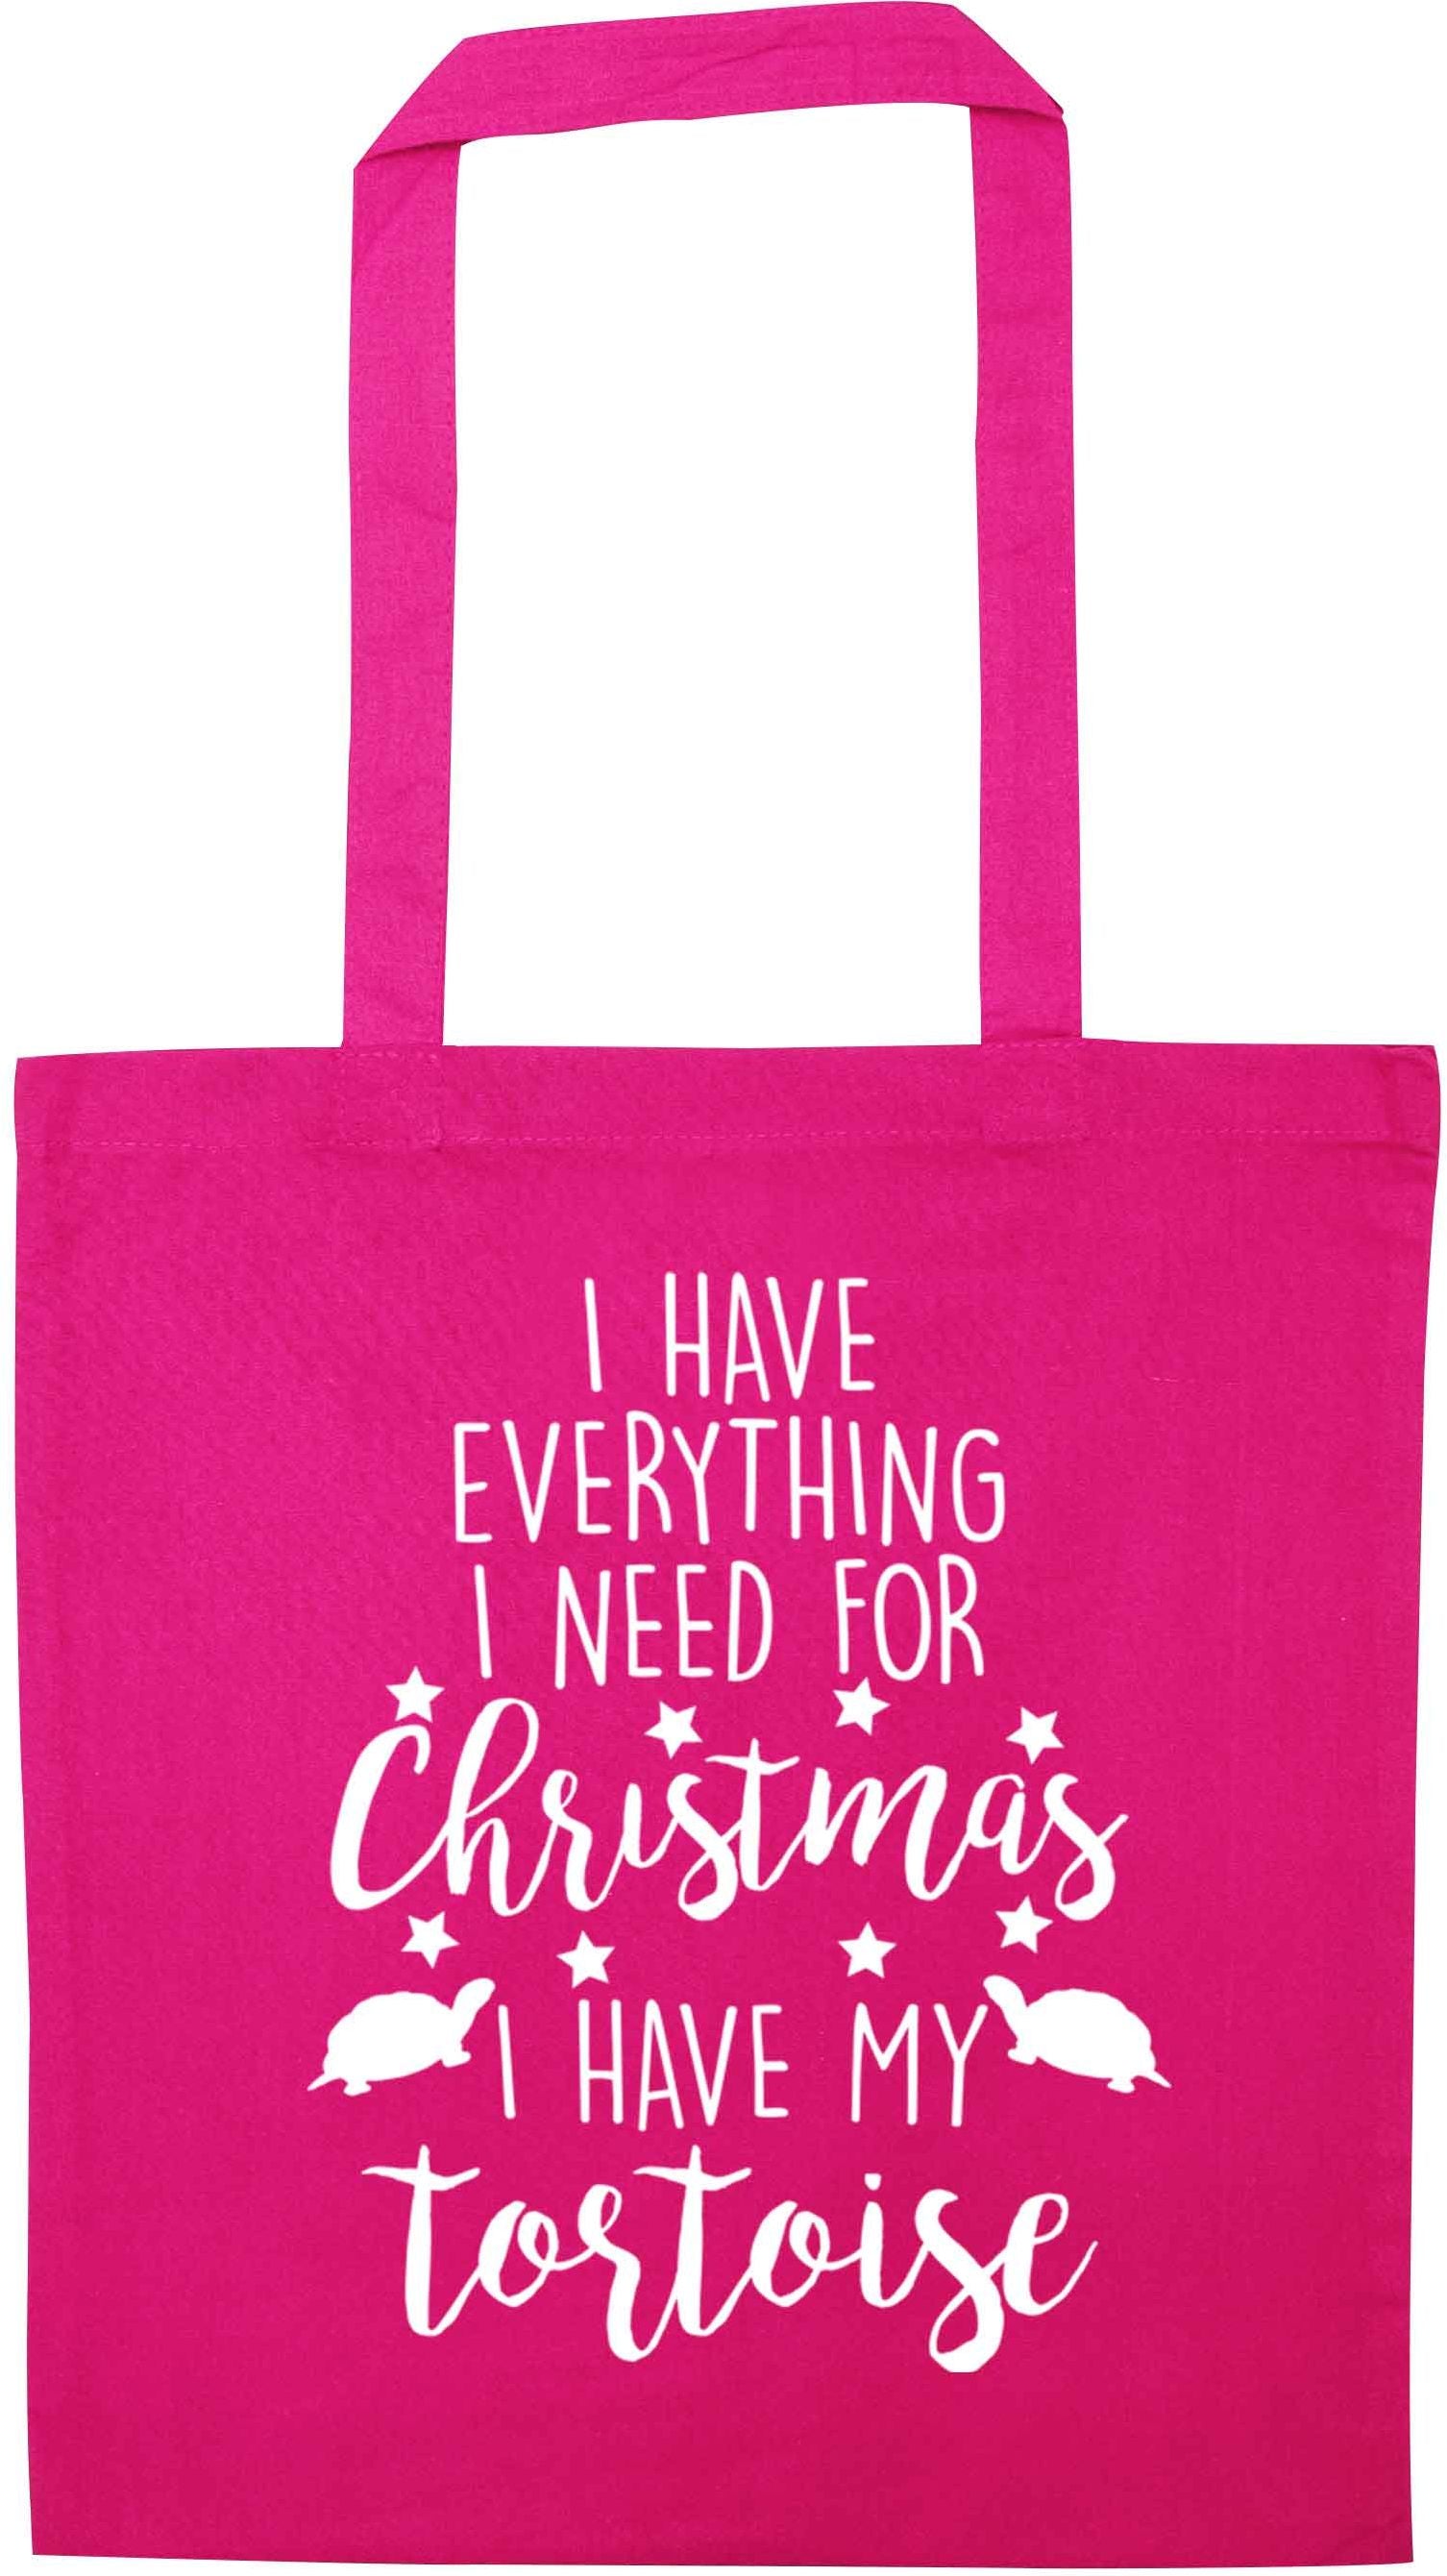 I have everything I need for Christmas I have my tortoise pink tote bag